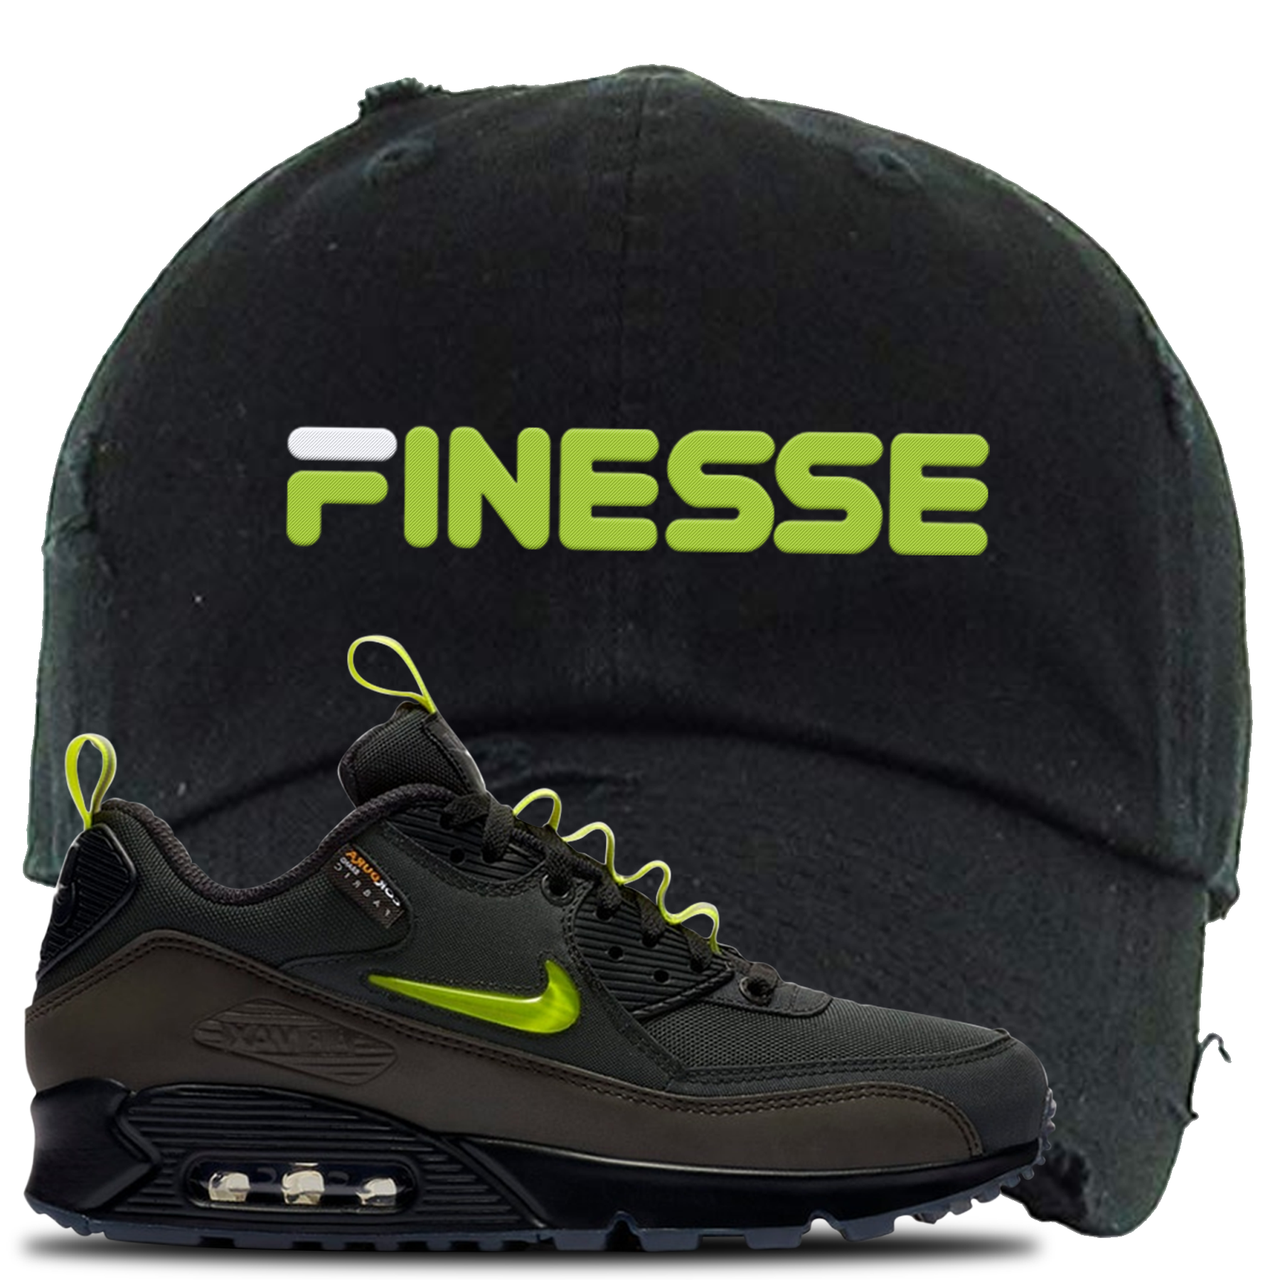 The Basement X Air Max 90 Manchester Finesse Black Sneaker Hook Up Distressed Dad Hat